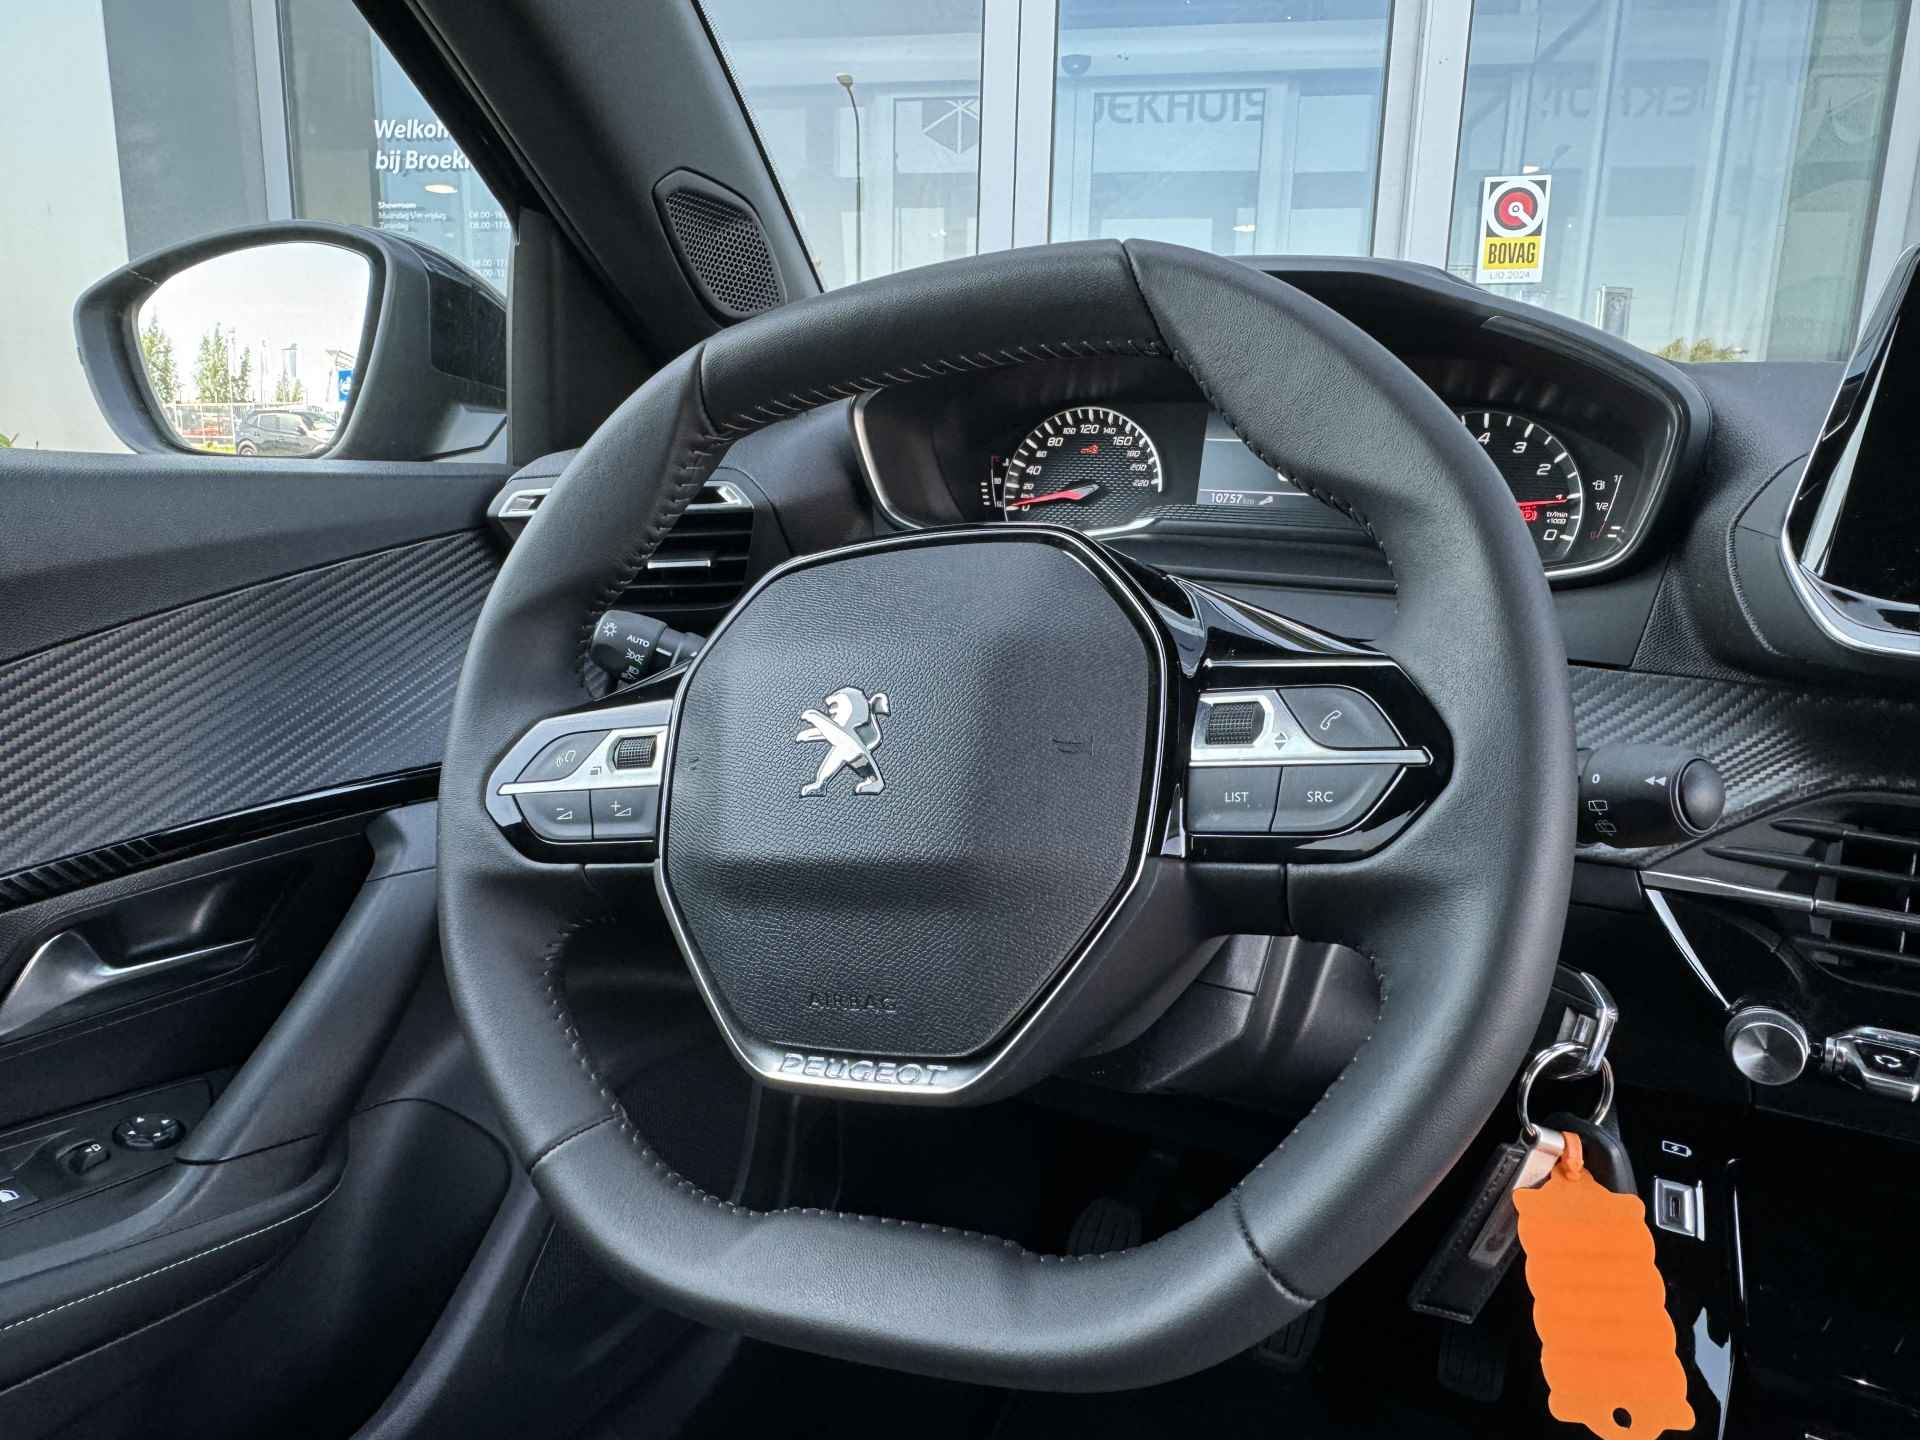 Peugeot 2008 1.2 100PK Allure | PDC achter | Climate Control | Cruise Control | Carplay - 24/29